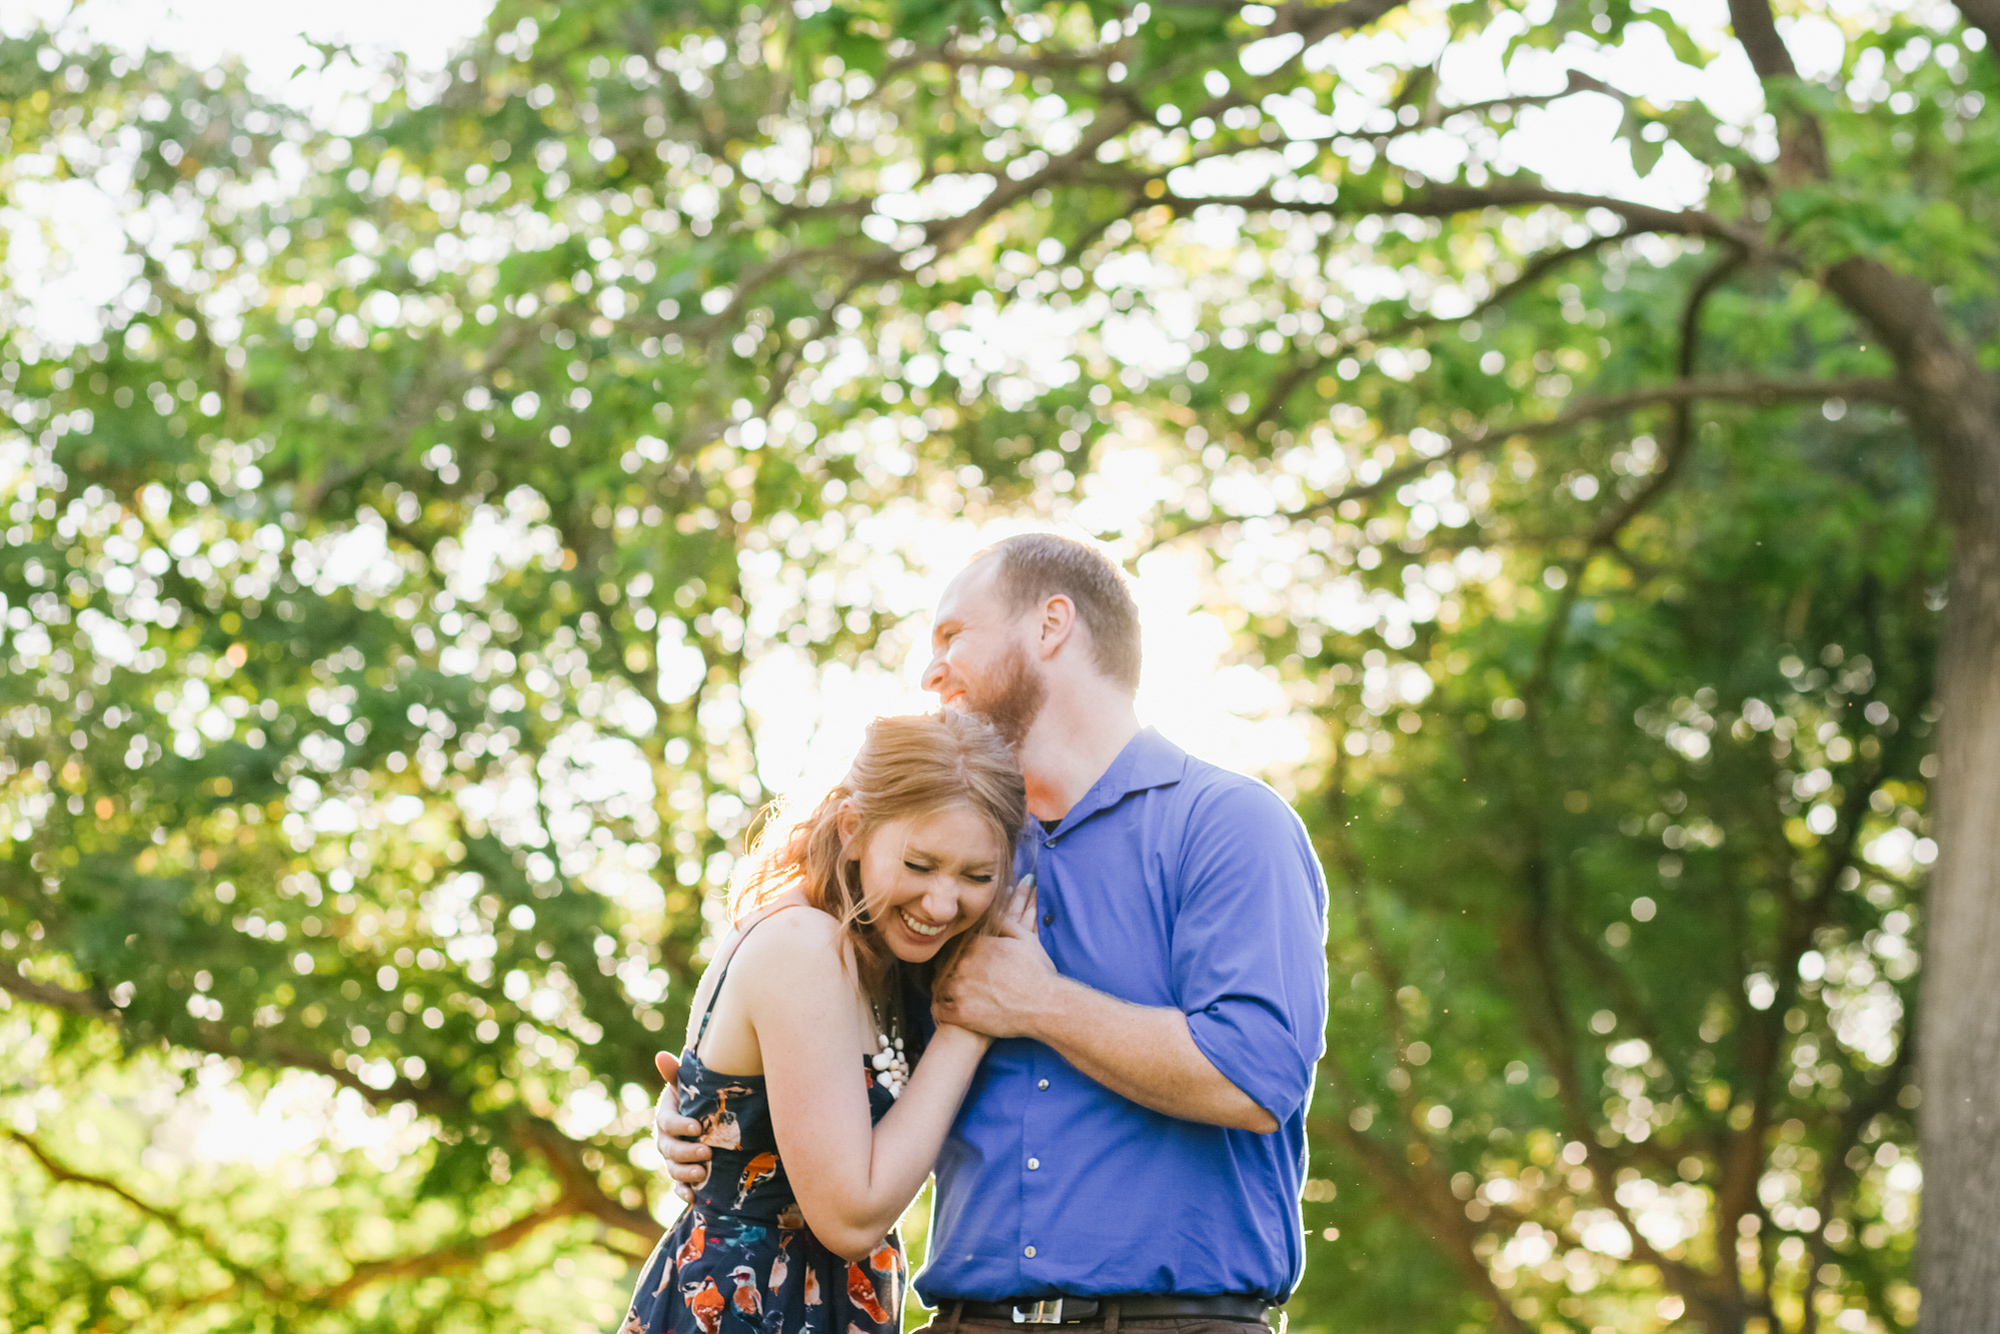 Tonya and Nick having a good time during their engagement session. 